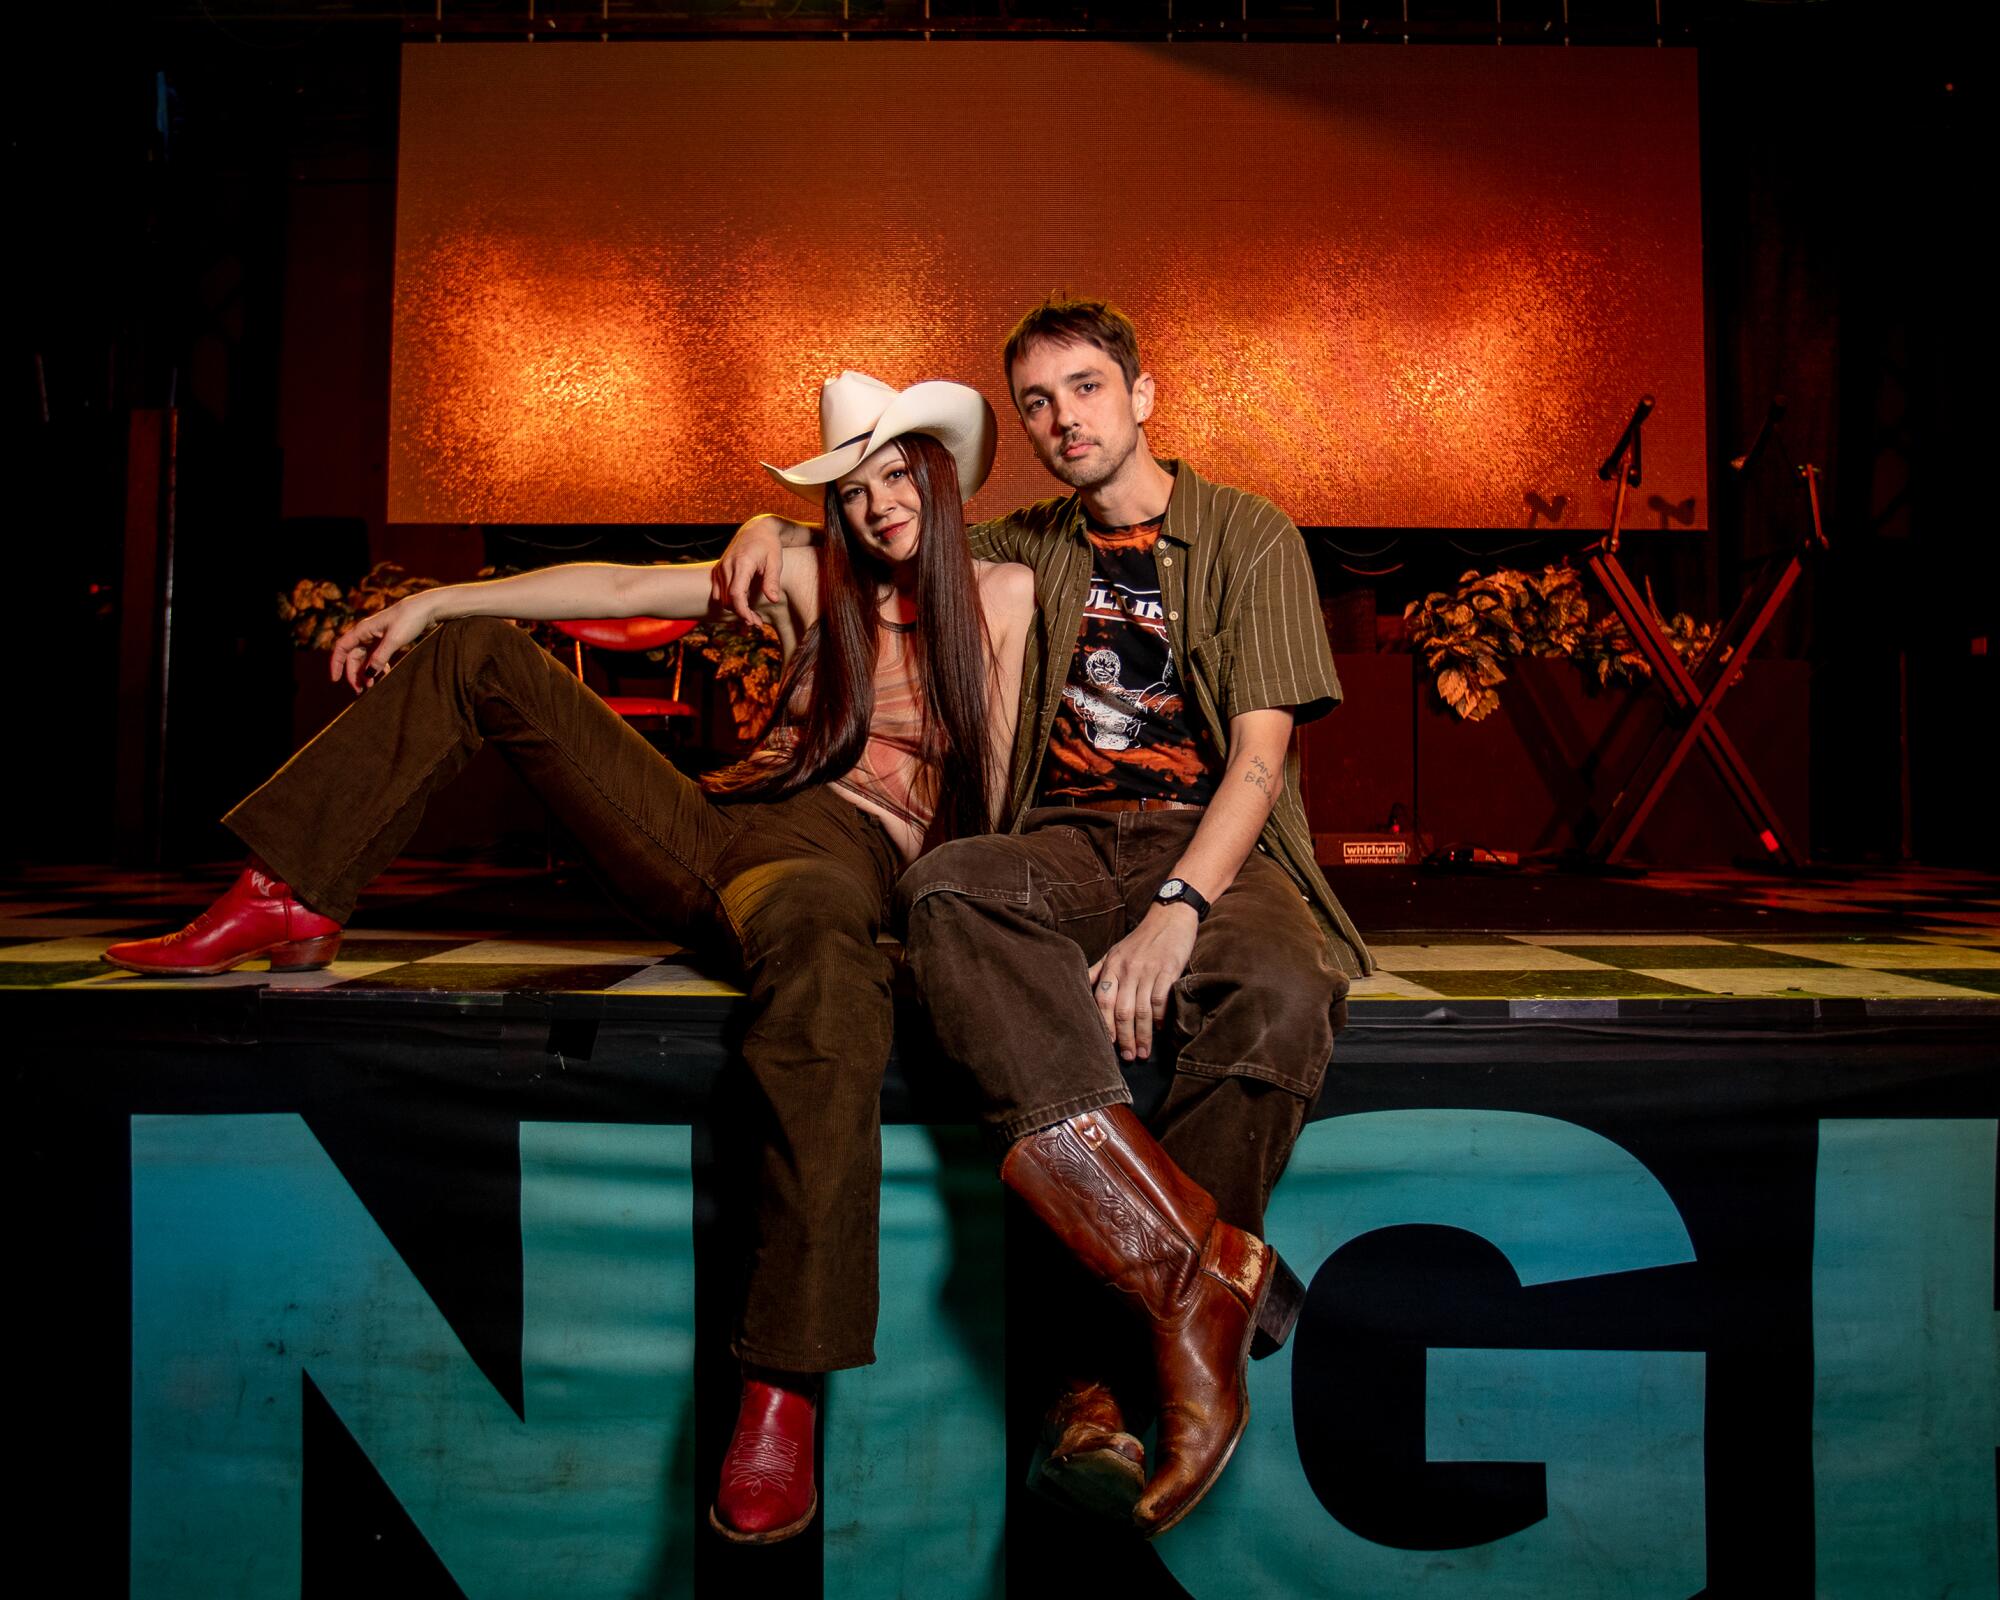 Two people sitting together on the edge of a stage.